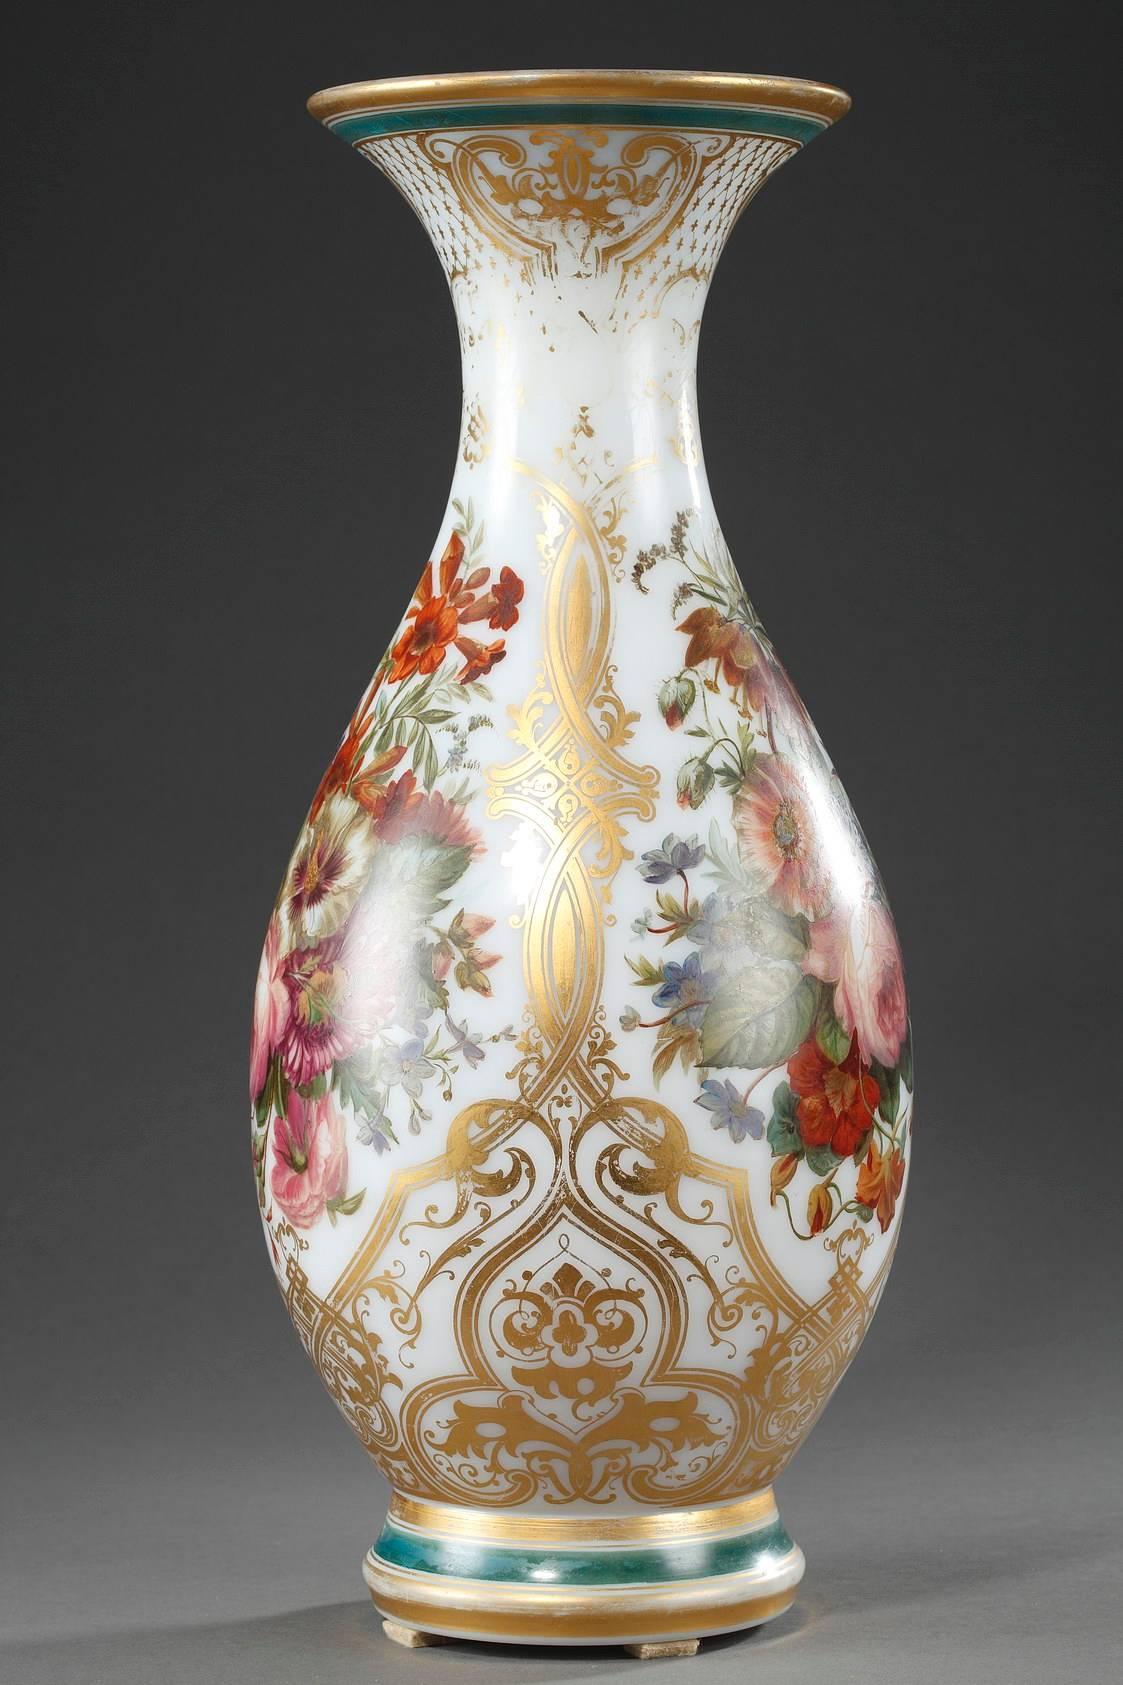 Baluster shaped vase in white, enameled opaline, with a multicolored decoration featuring bouquets of flowers on a white background. Gilded arabesques and latticework surround the bouquets, and the rim and base are decorated with broad, gilt and